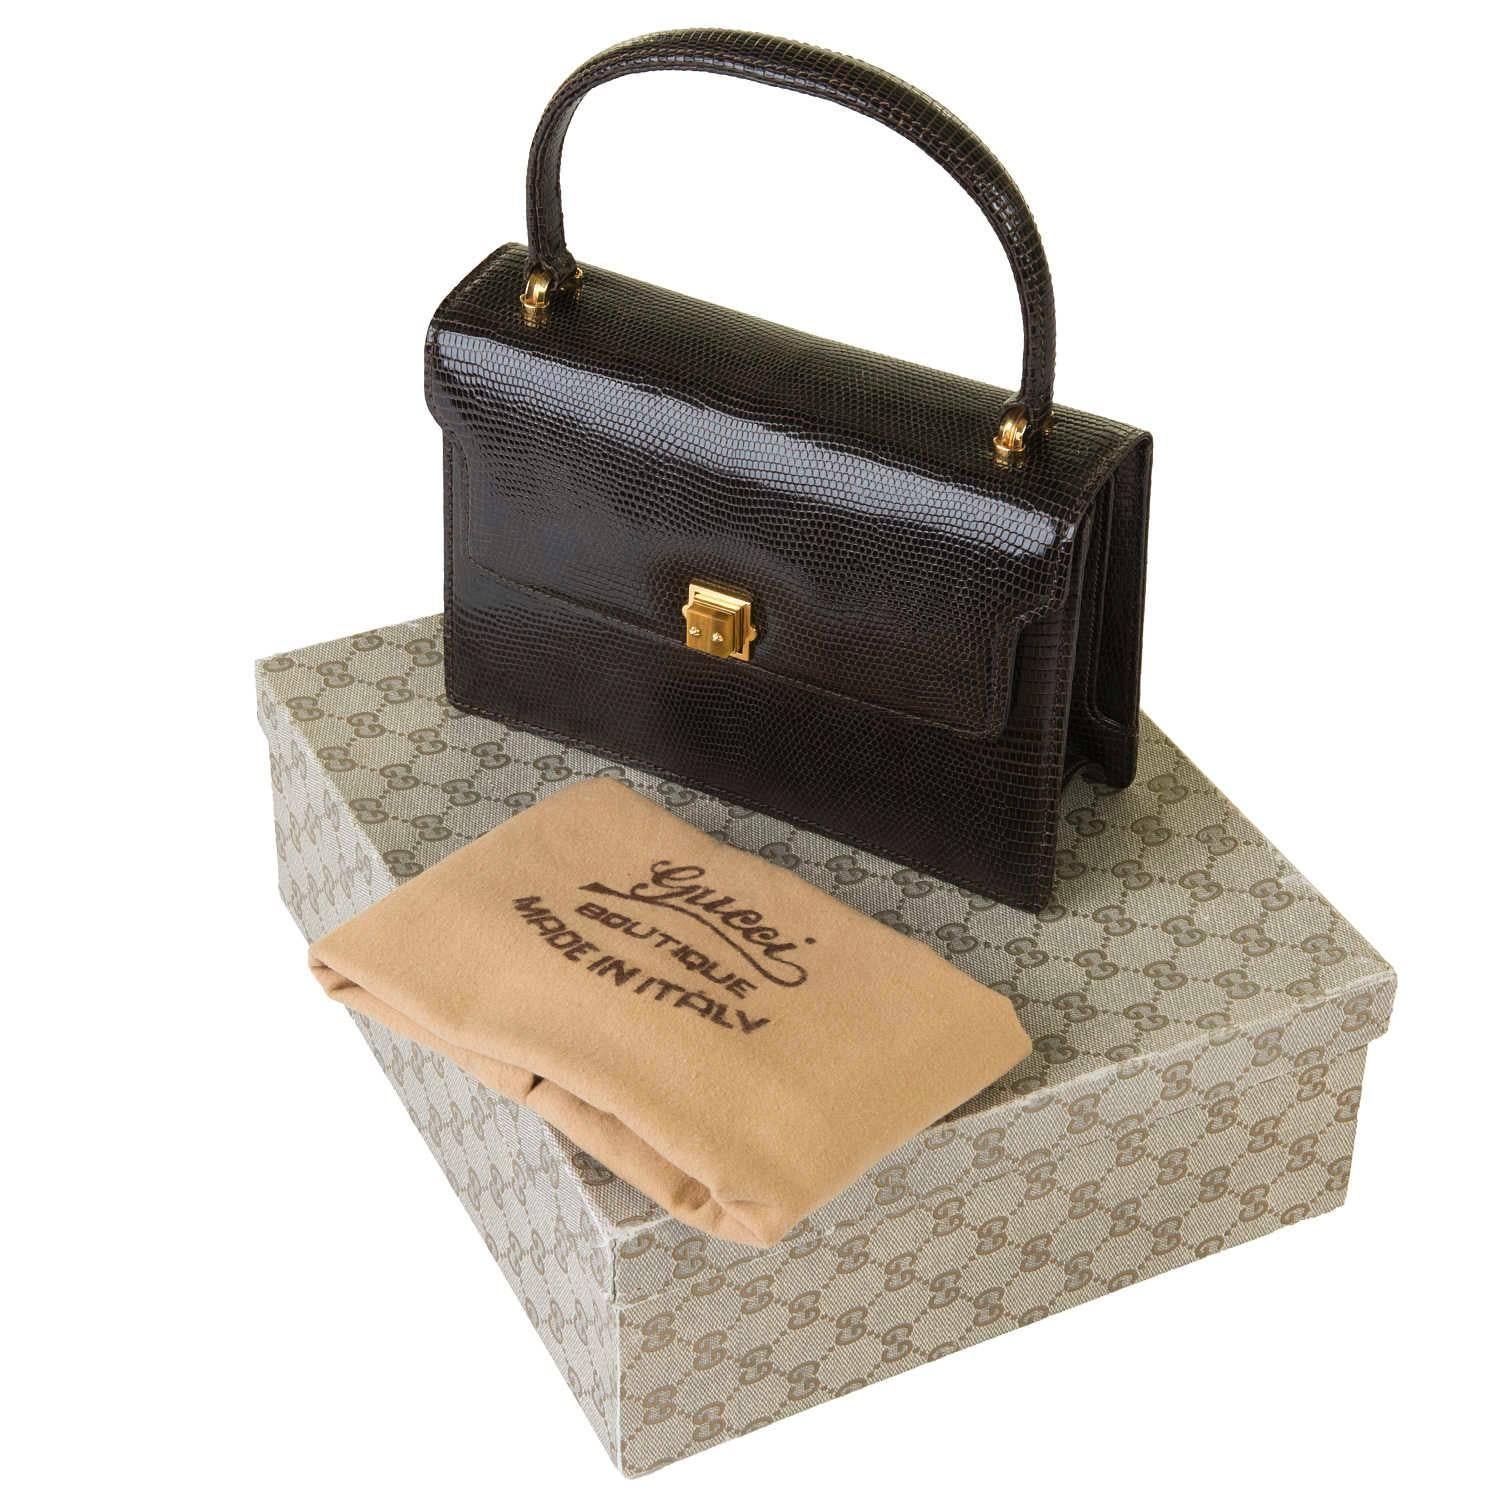 This Vintage, Special Order,  Gucci Chocolate Brown Lizard Handbag, made in circa 1970, is in pristine condition and remarkably comes with it's original dust sack and box. Certainly almost never used, the Lizard is complemented with gold tone